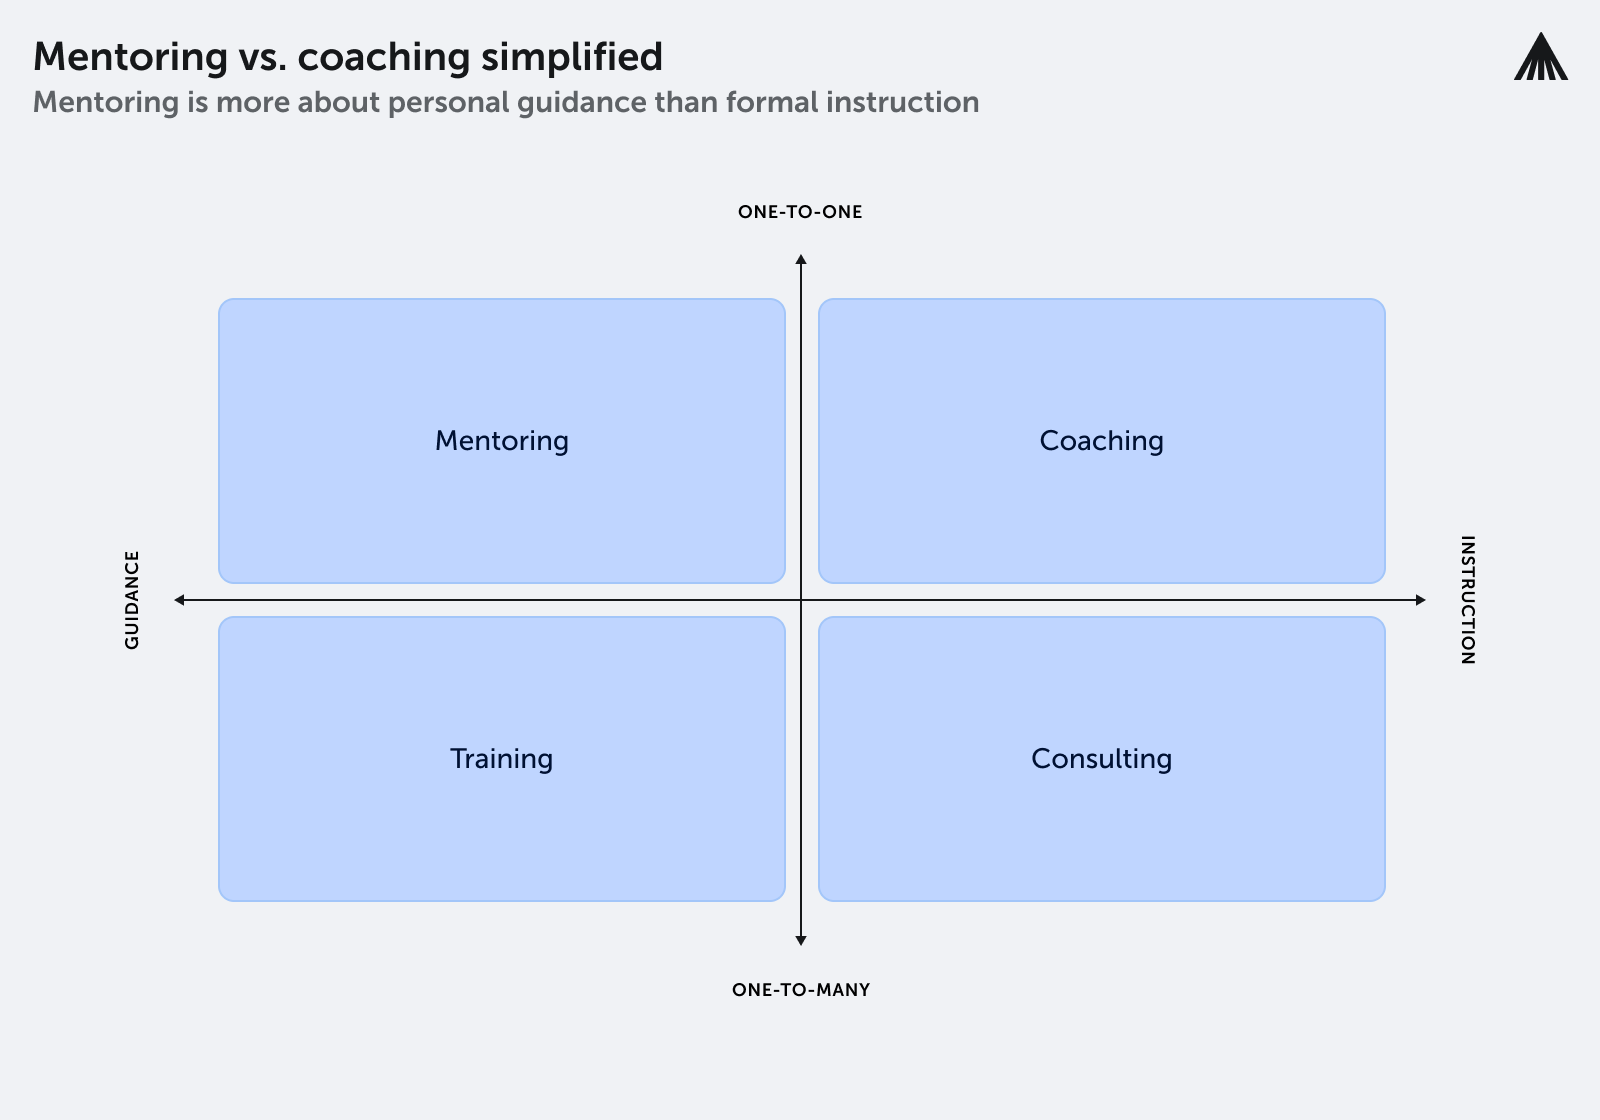 The image demonstrates the difference between mentoring and coaching.